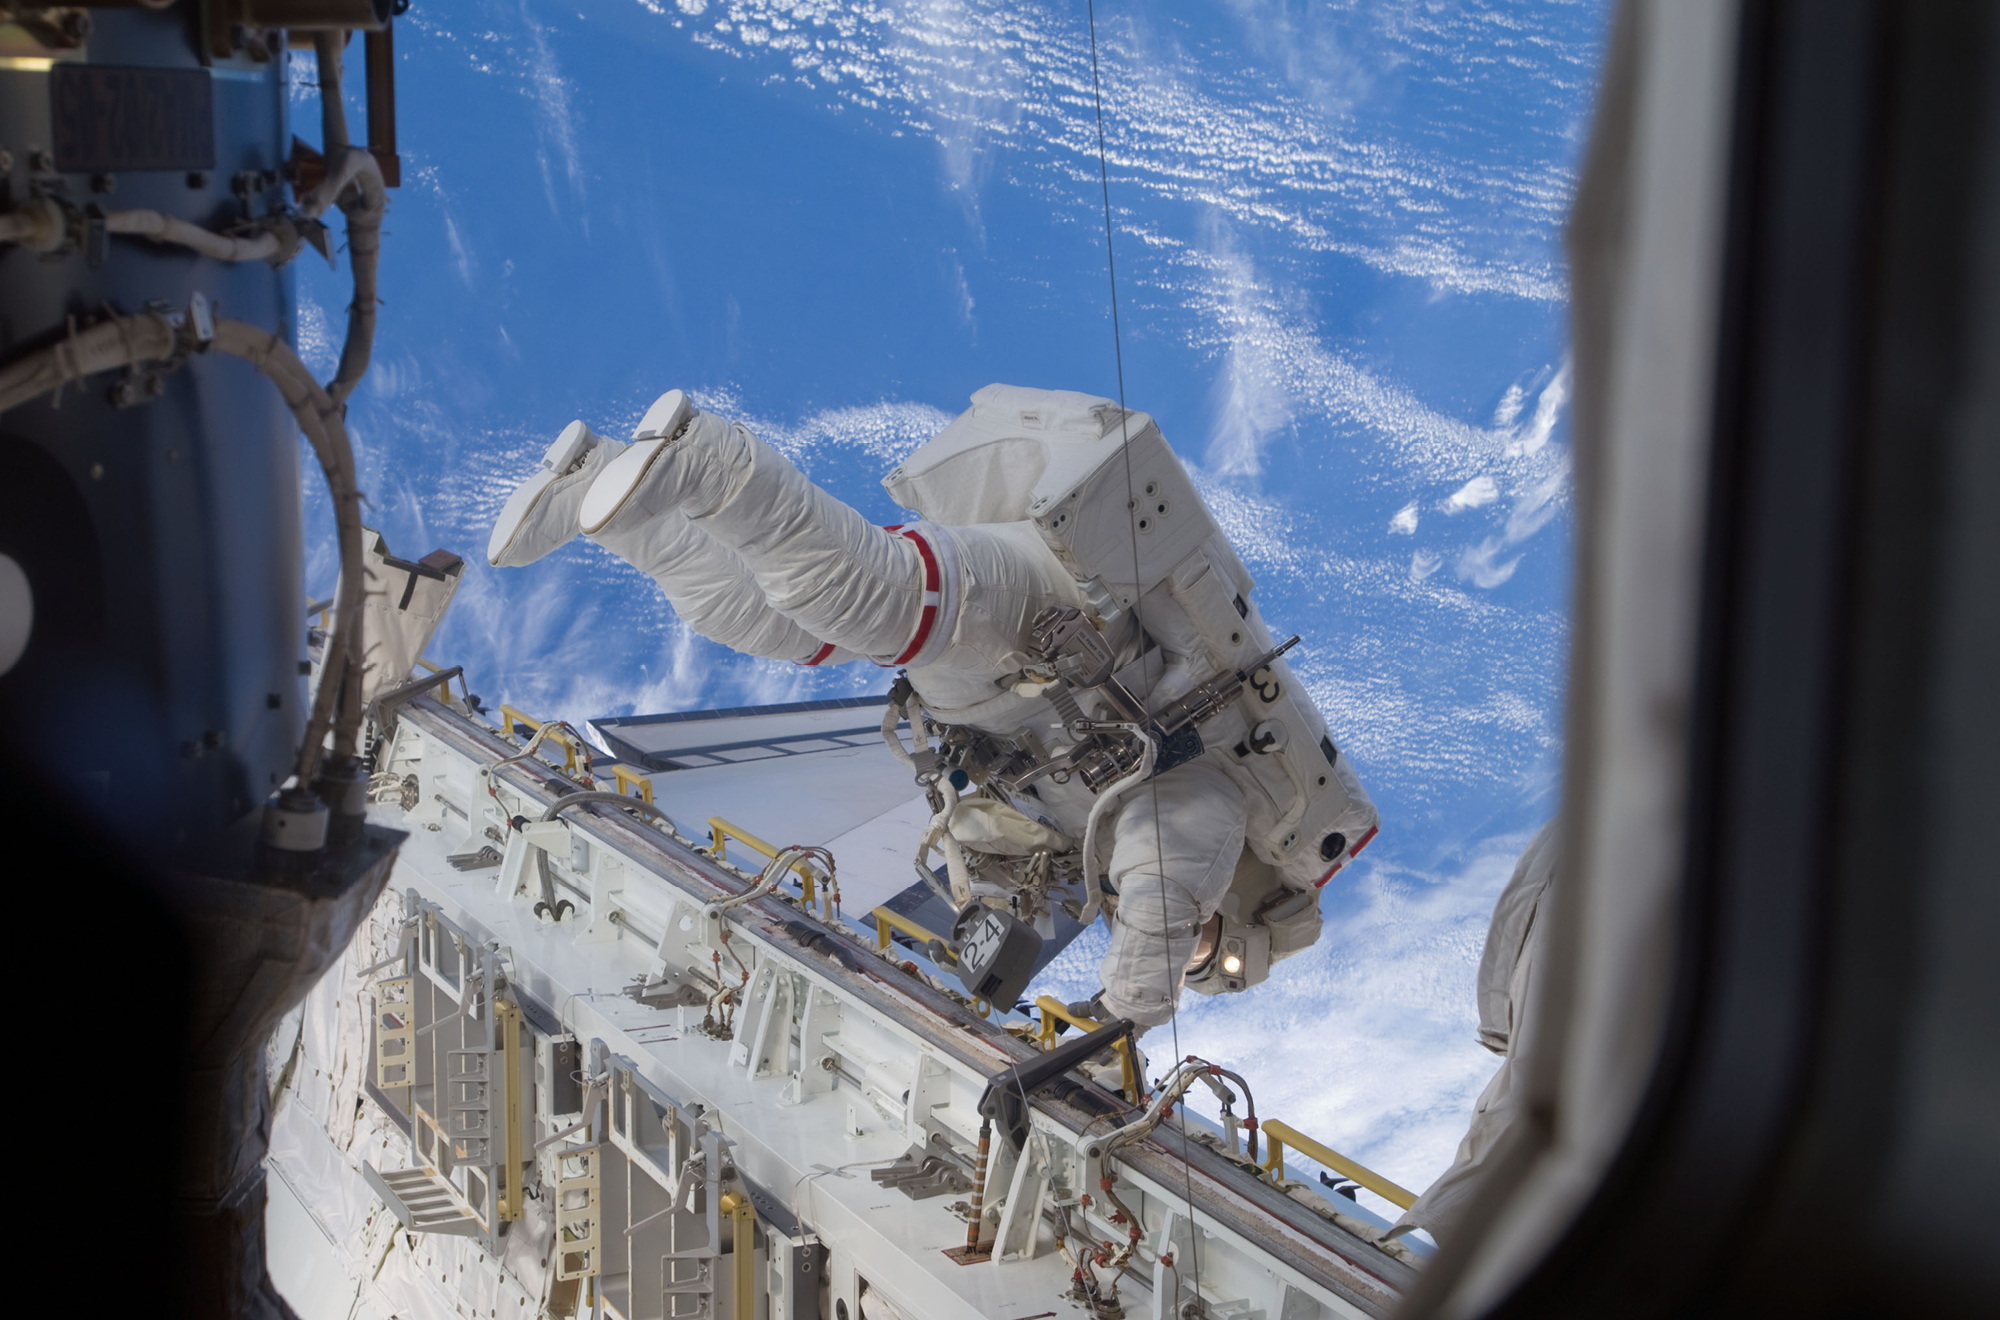 Astronaut Nicole Stott, Expedition 20 flight engineer, participates in the STS-128 mission's first session of extravehicular activity as construction and maintenance continue on the International Space Station. Image courtesy of NASA